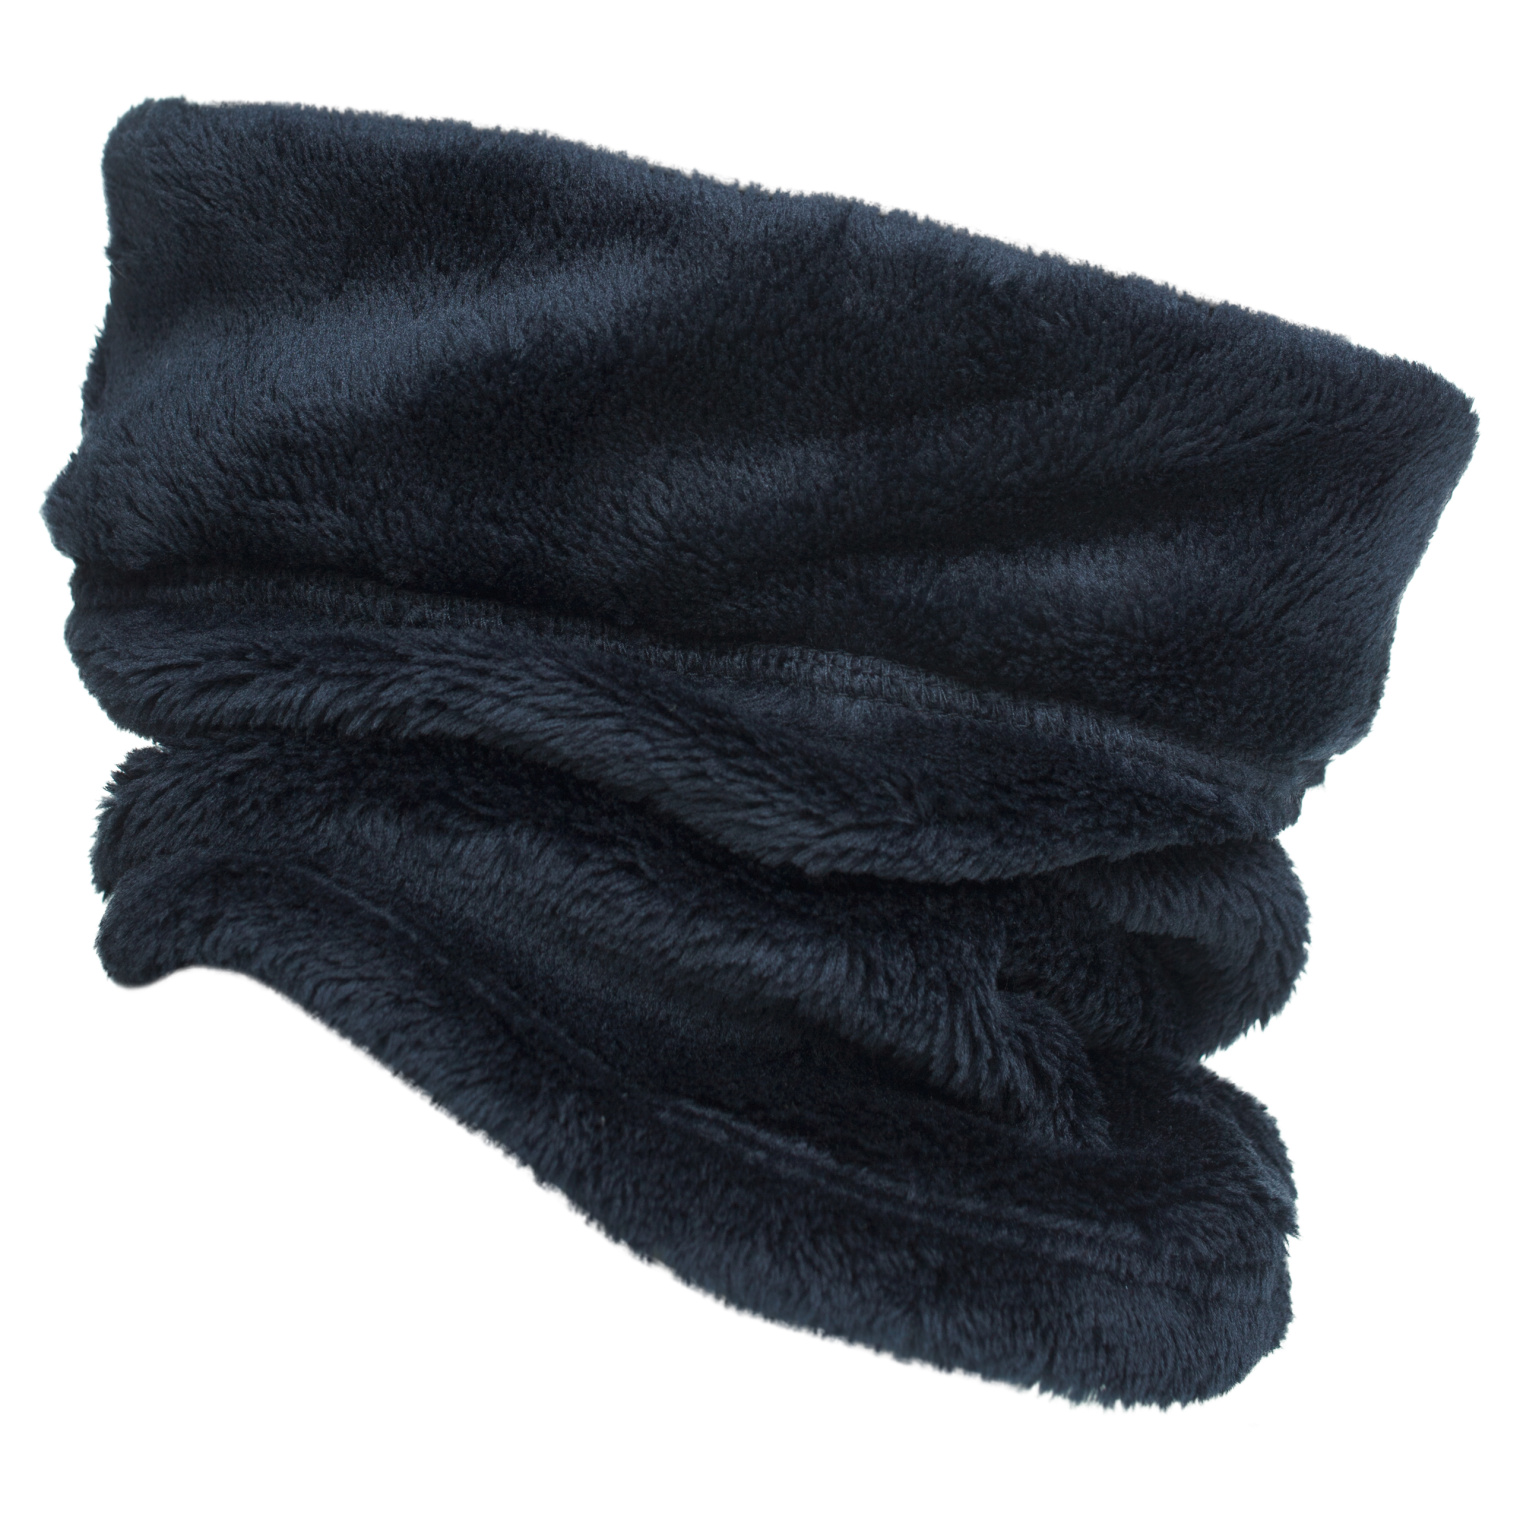 Undercover Undercover x Nonnative fleece scarf with patch